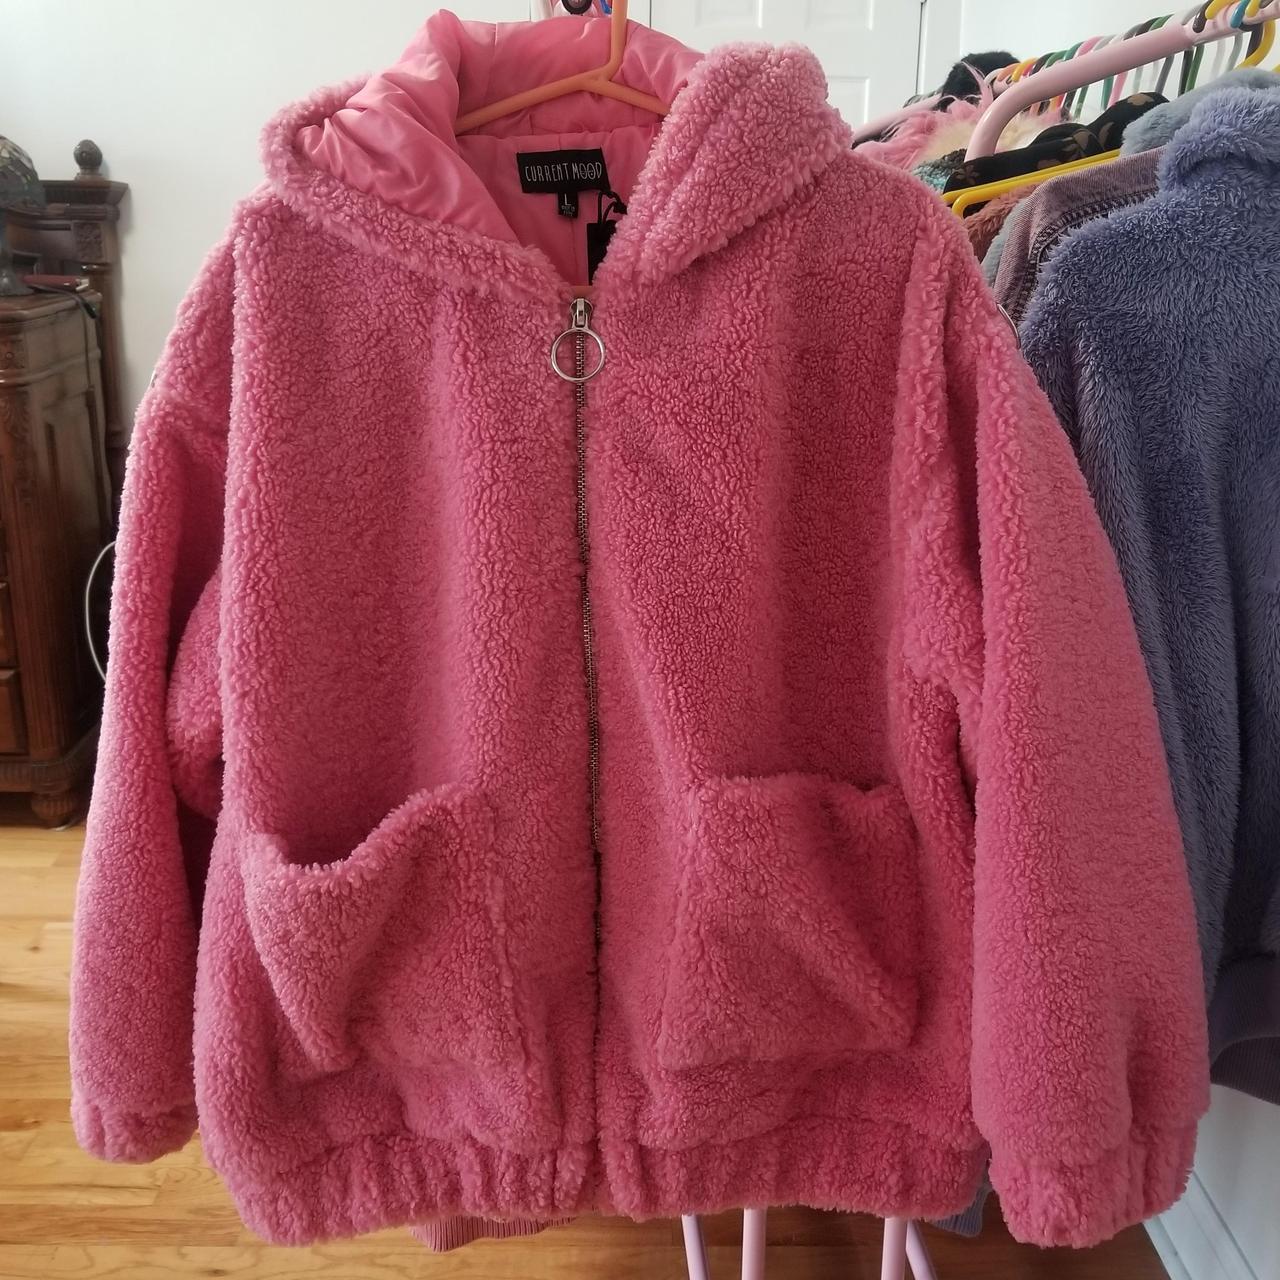 Current Mood size large pink hooded teddy jacket....